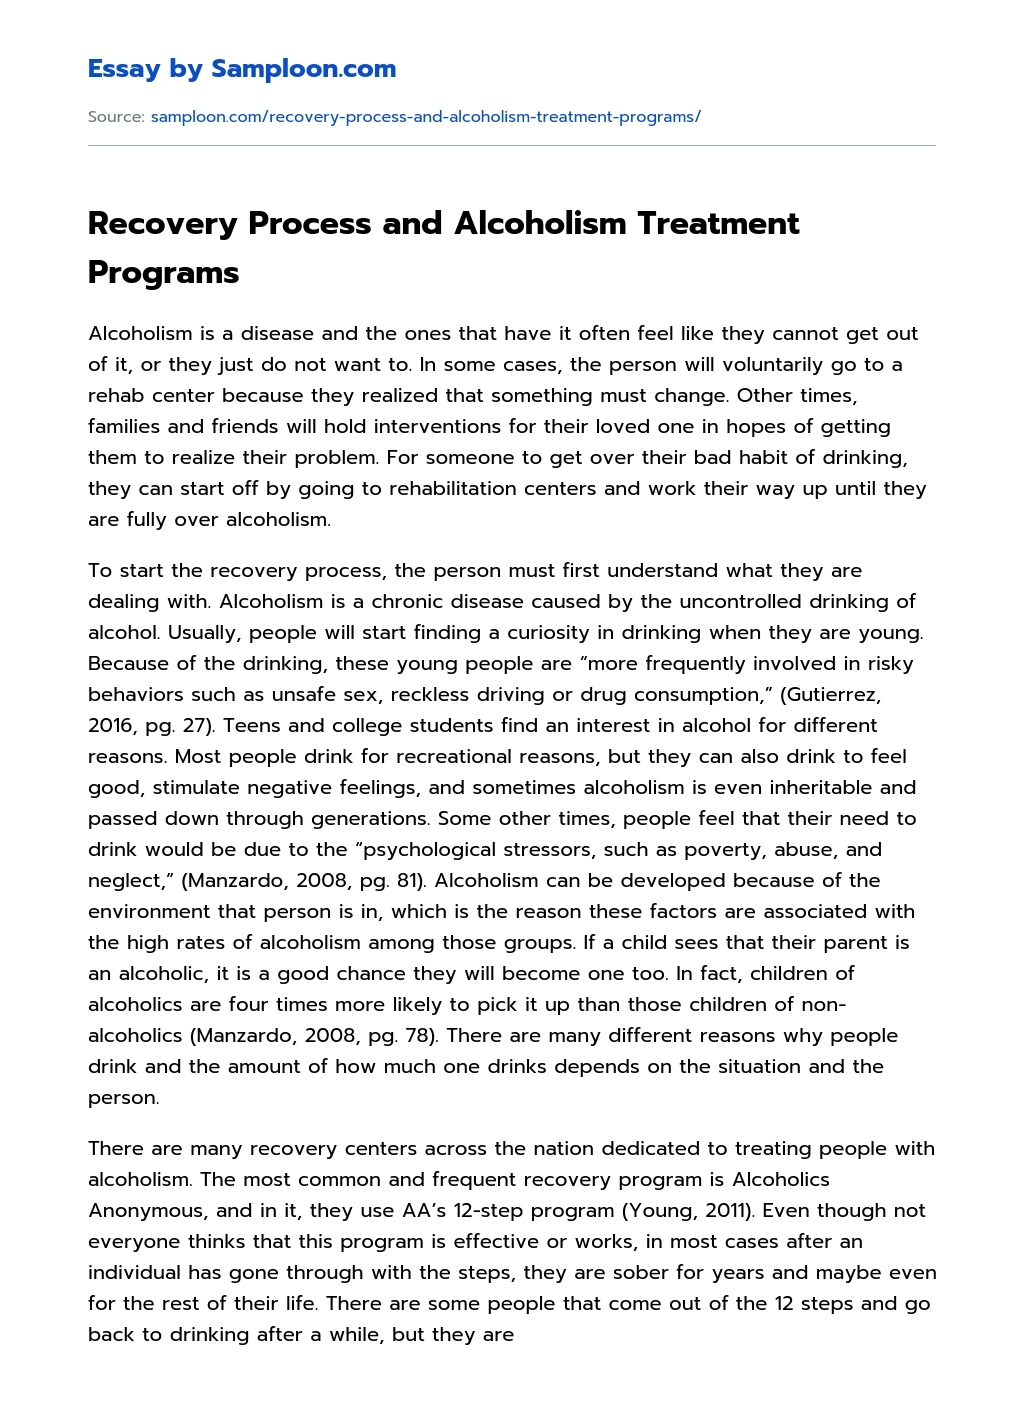 Recovery Process and Alcoholism Treatment Programs essay